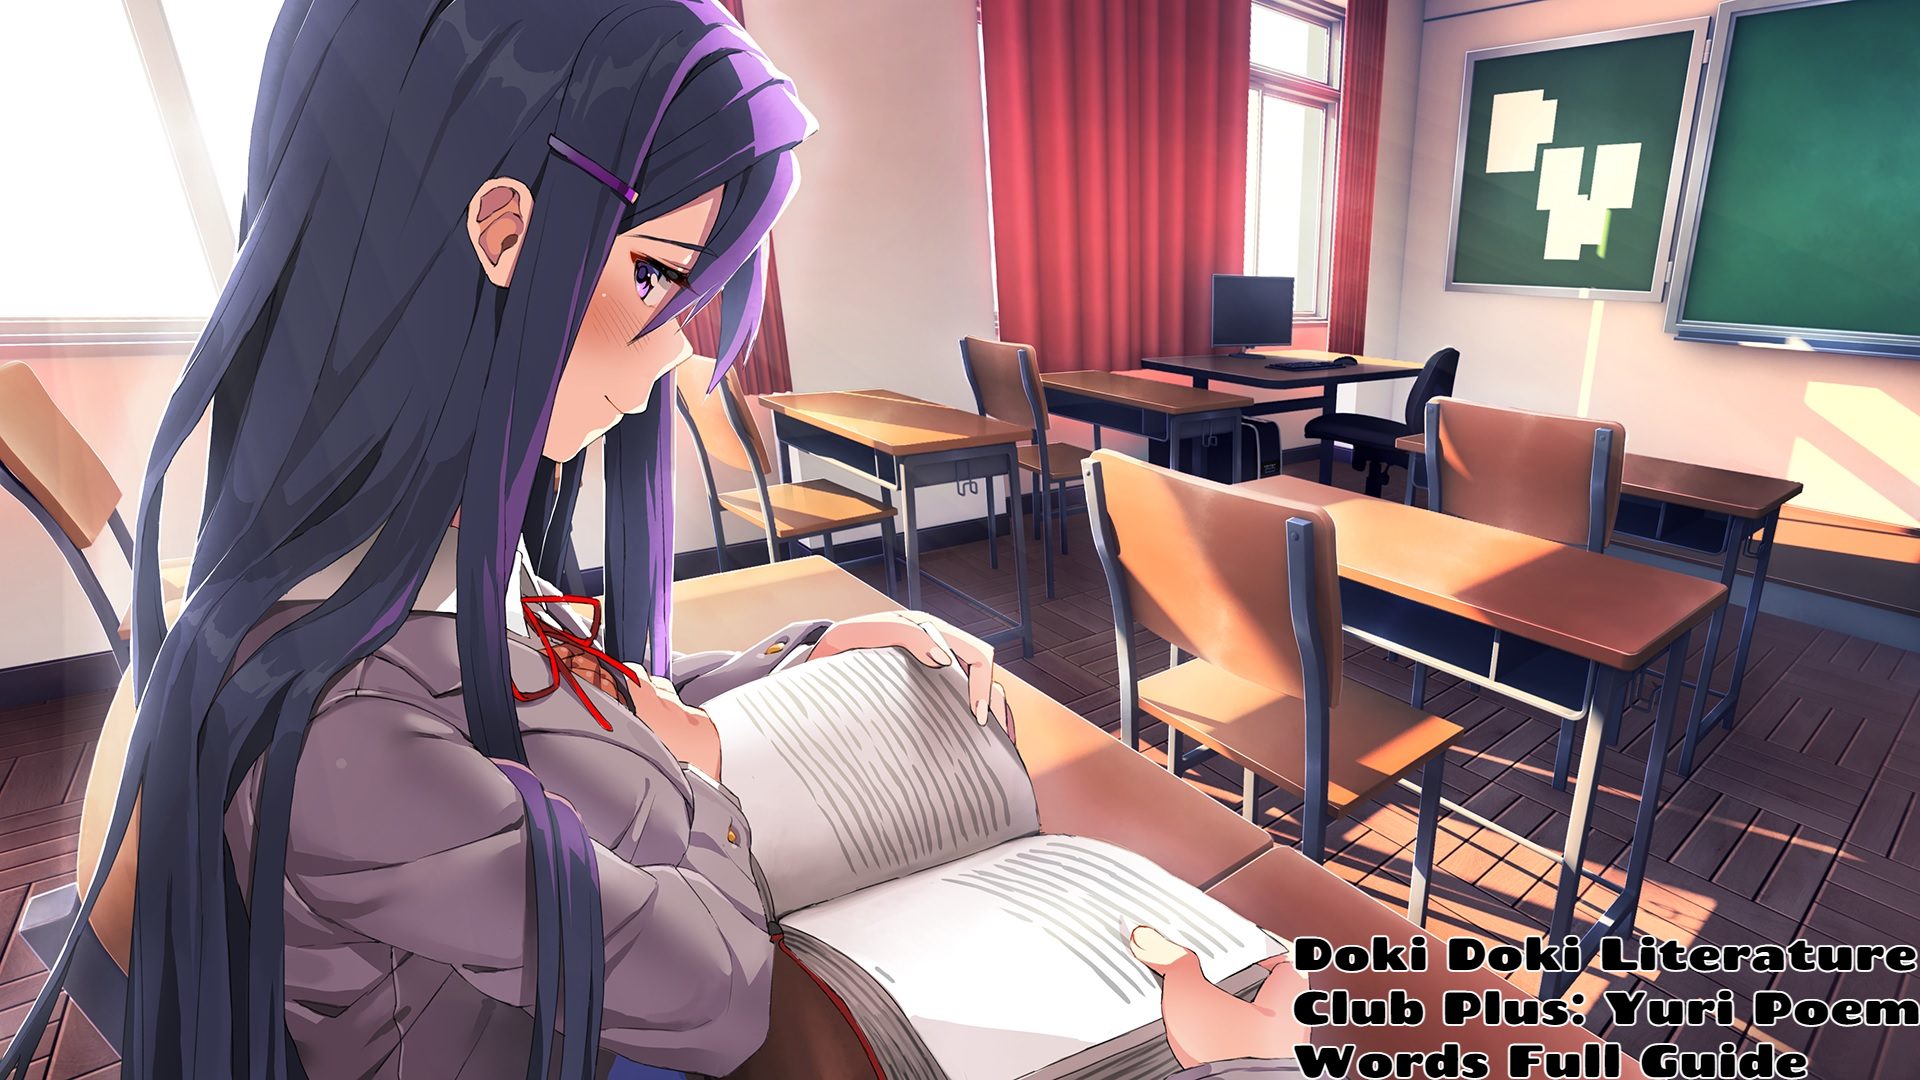 You are currently viewing Doki Doki Literature Club Plus: Yuri Poem Words Full Guide